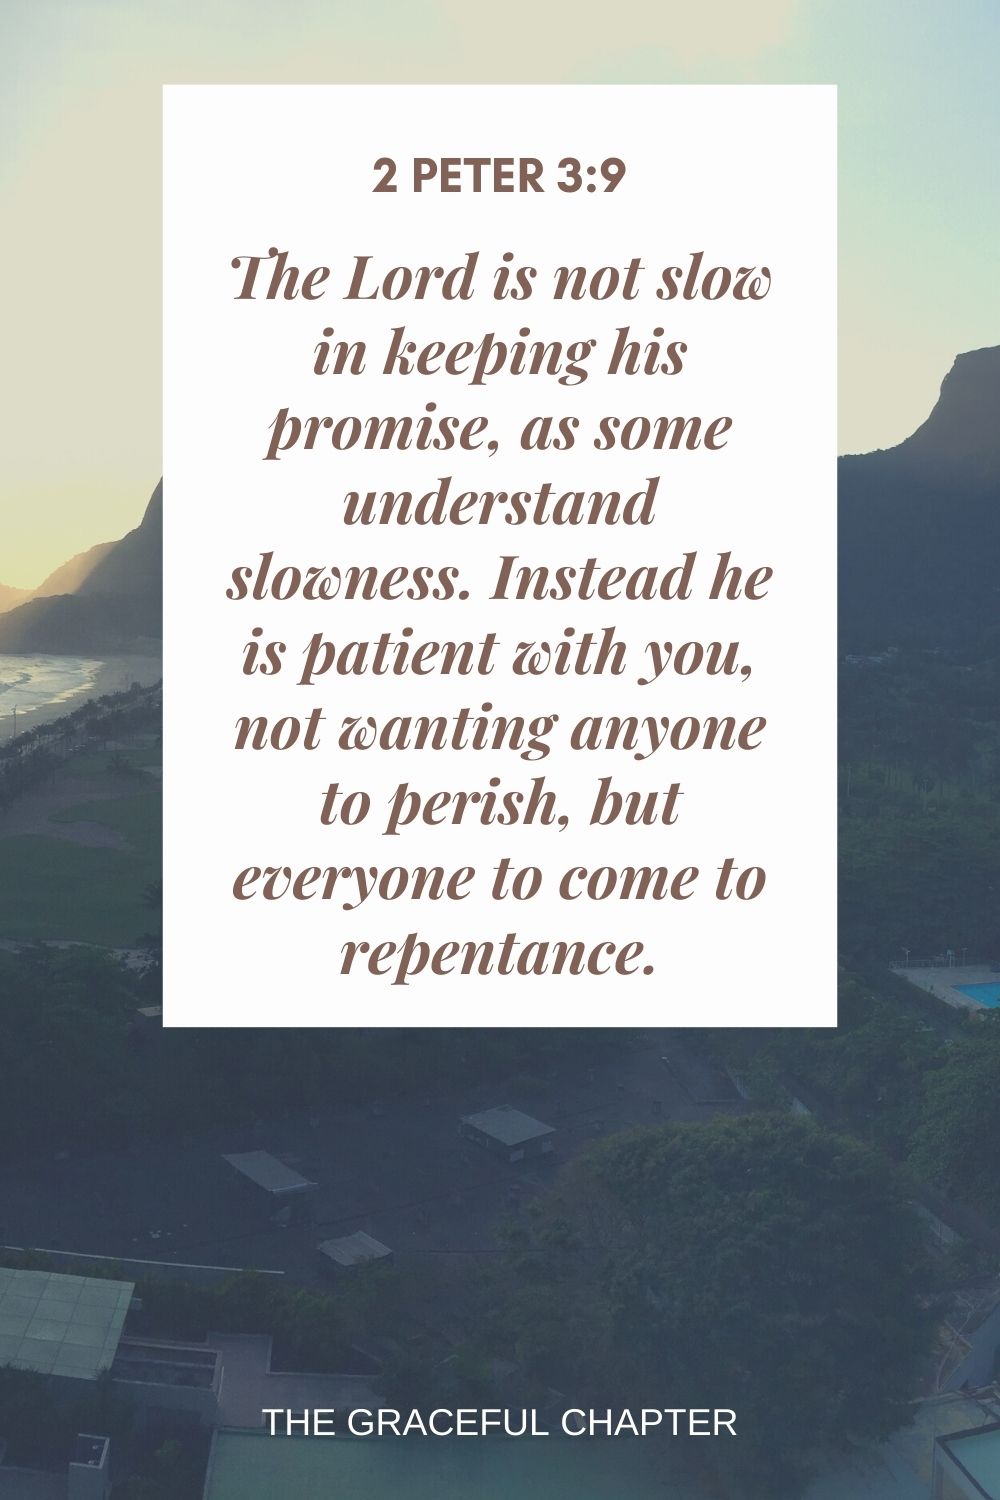 The Lord is not slow in keeping his promise, as some understand slowness. Instead he is patient with you, not wanting anyone to perish, but everyone to come to repentance. 2 Peter 3:9